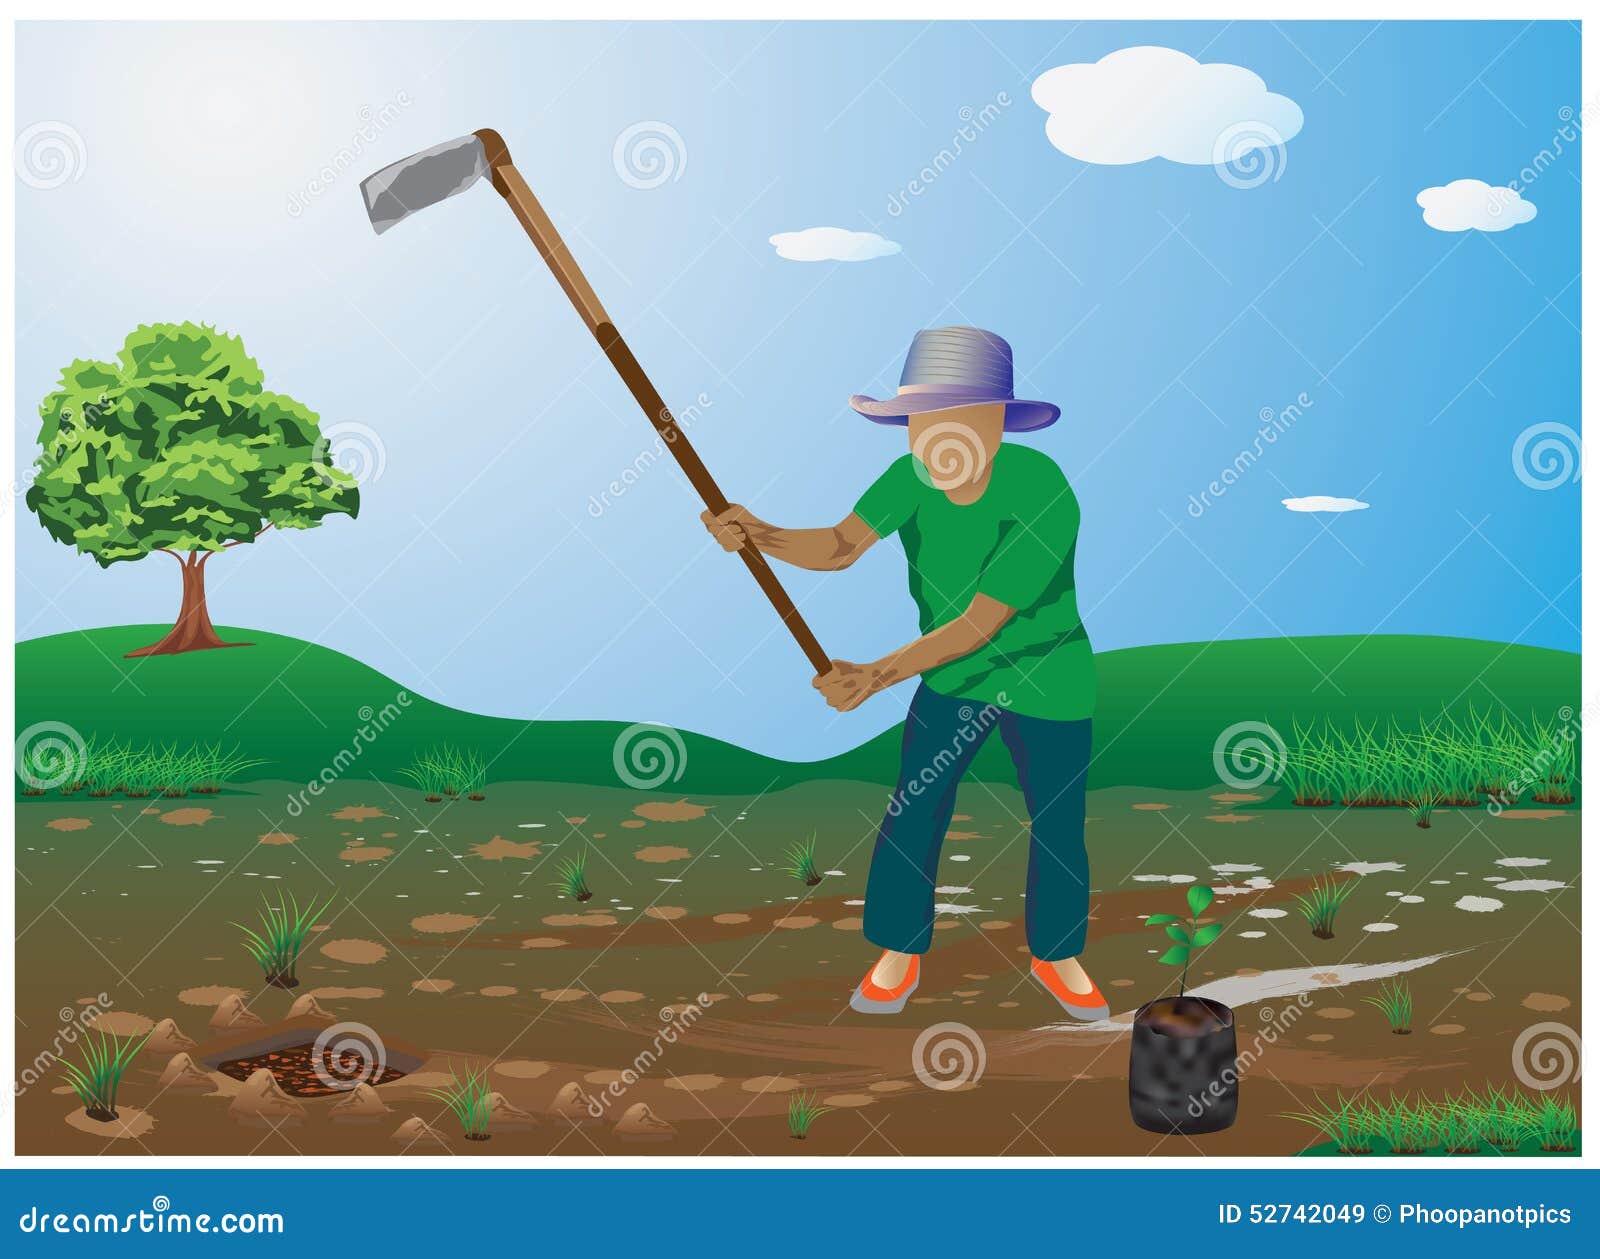 The agriculturist stock vector. Illustration of rice - 52742049